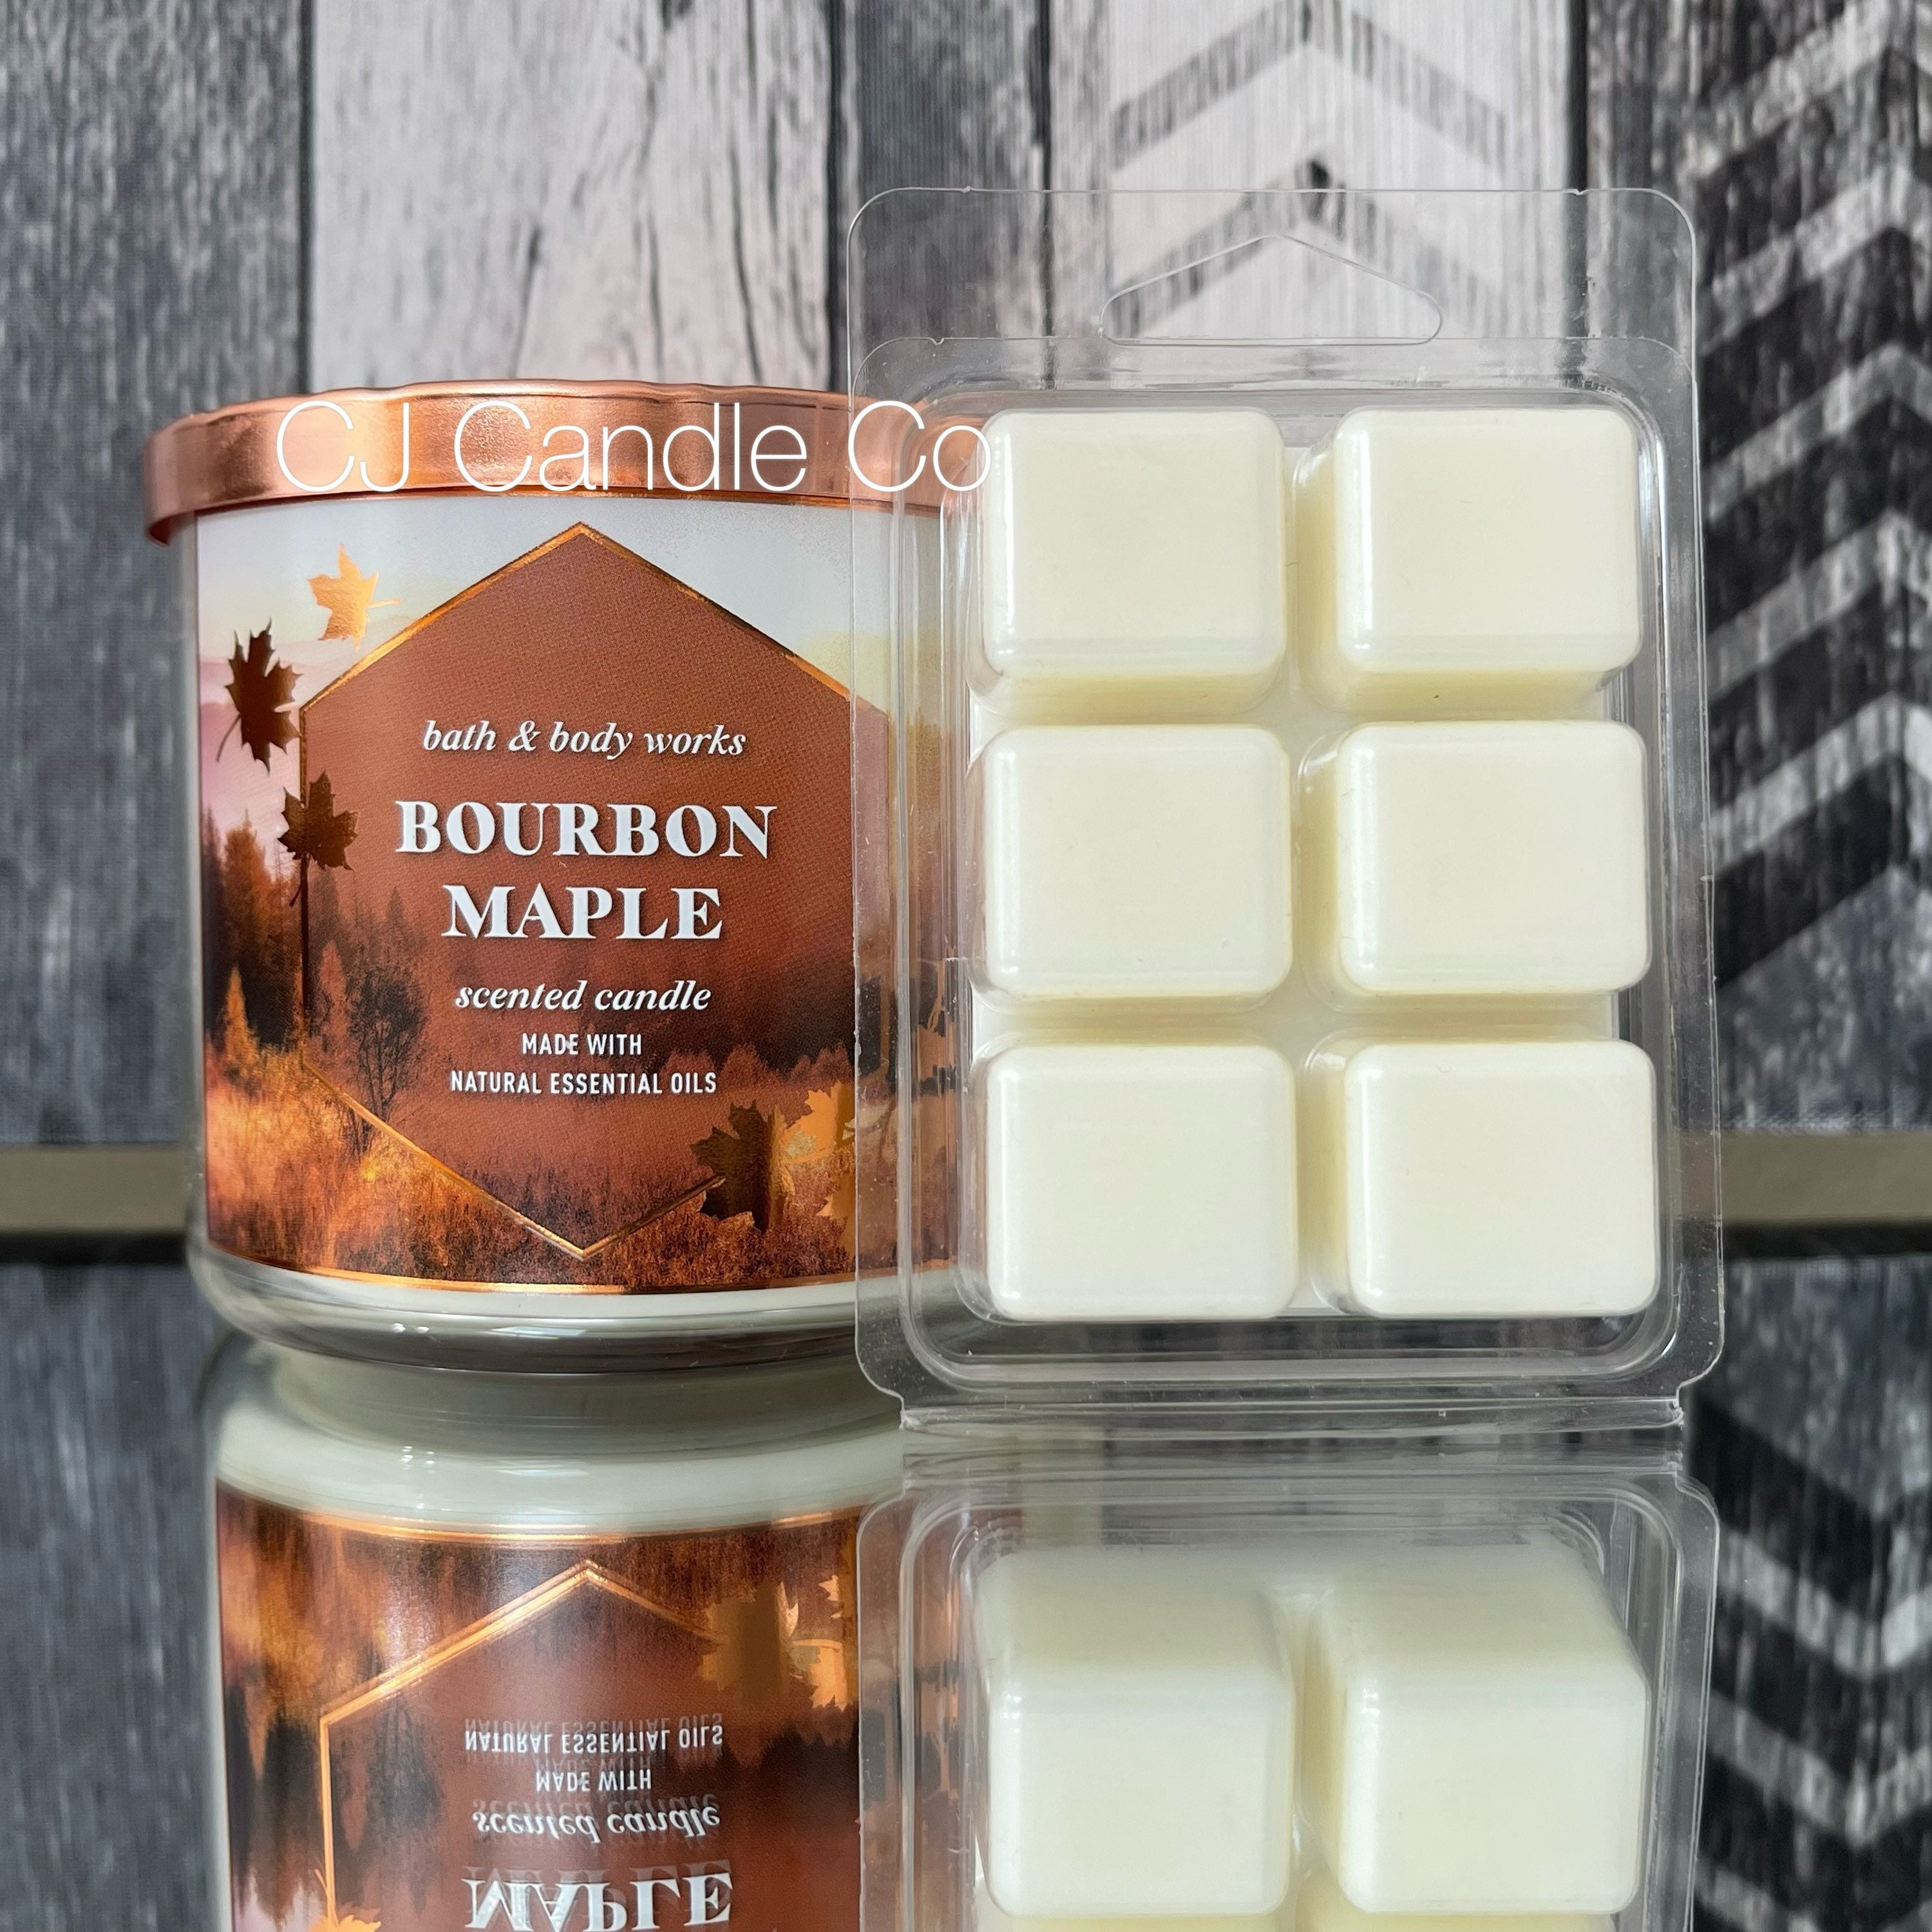 Bourbon Maple Bath & Body Works Candle Wax Melts BBW Wax Melts Perfect Gift  for Mom, Sister, Best Friend, Valentines Day Anniversary 